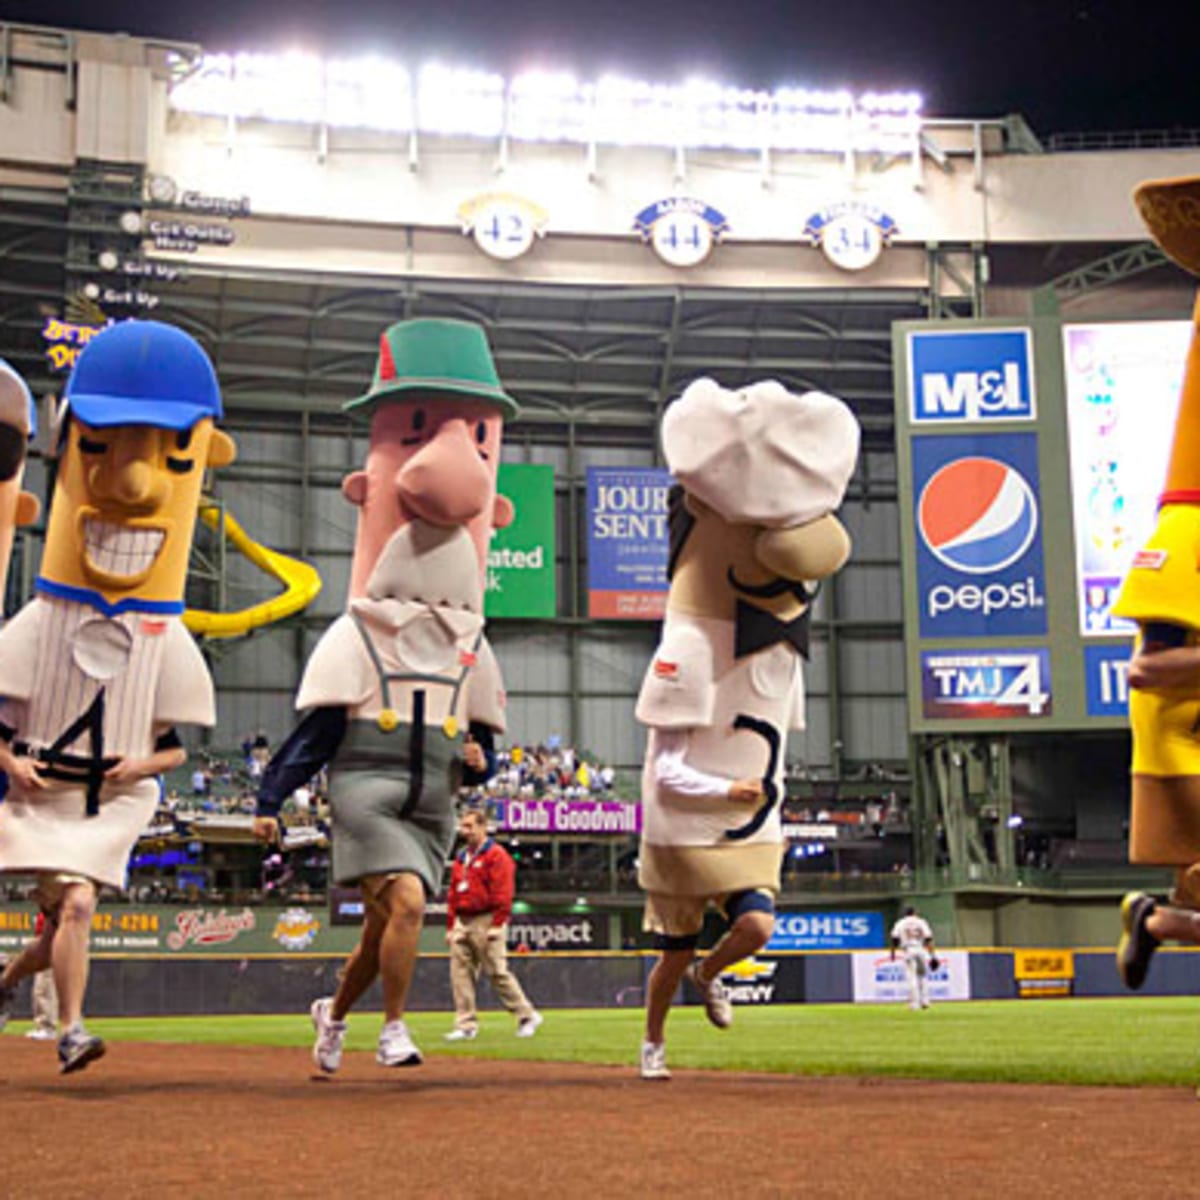 Brewers cut link to Klements in famed sausage race - Wausau Pilot